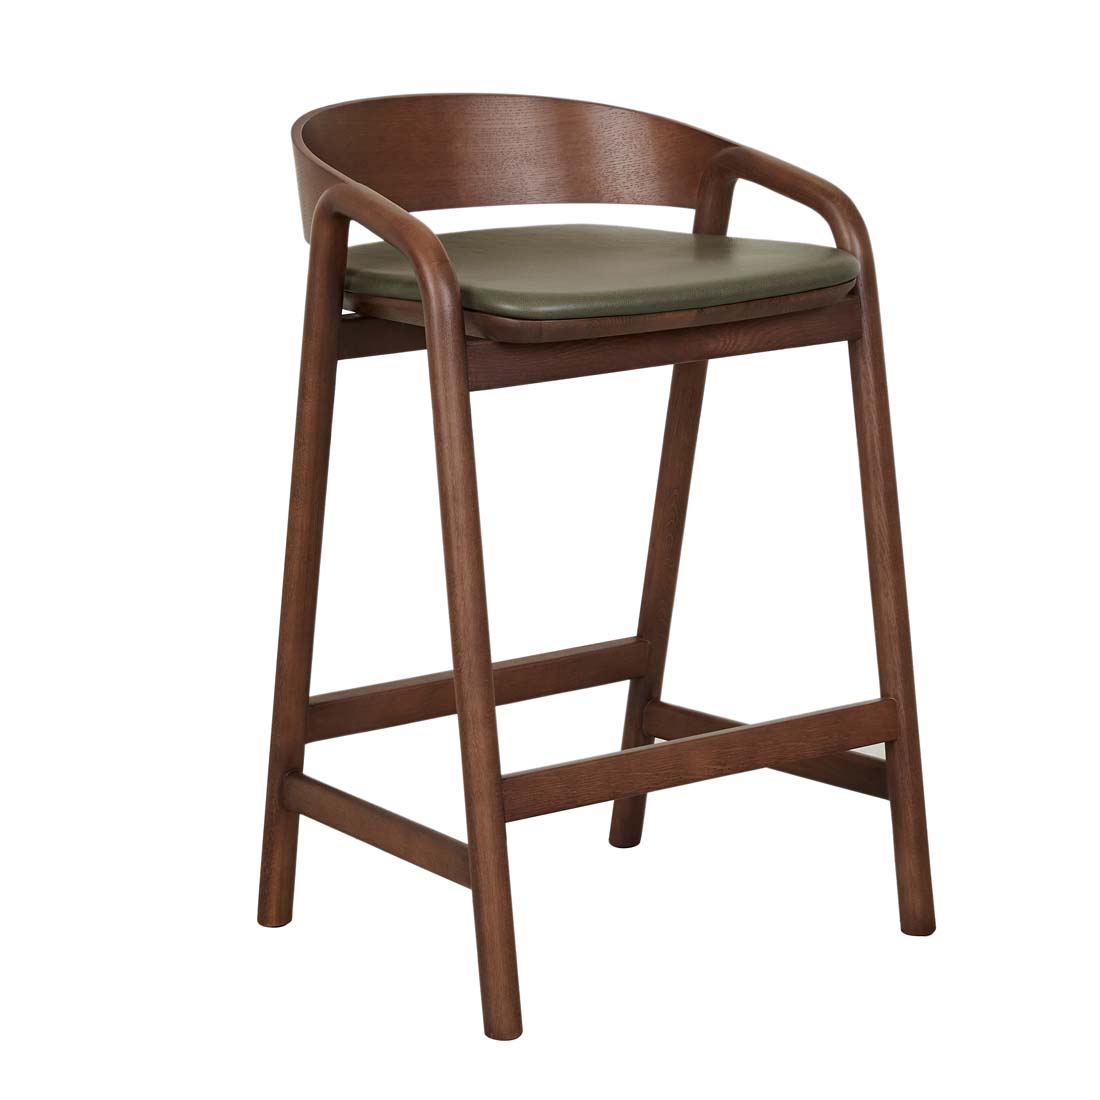 Tolv Inlay Upholstered Barstool image 16